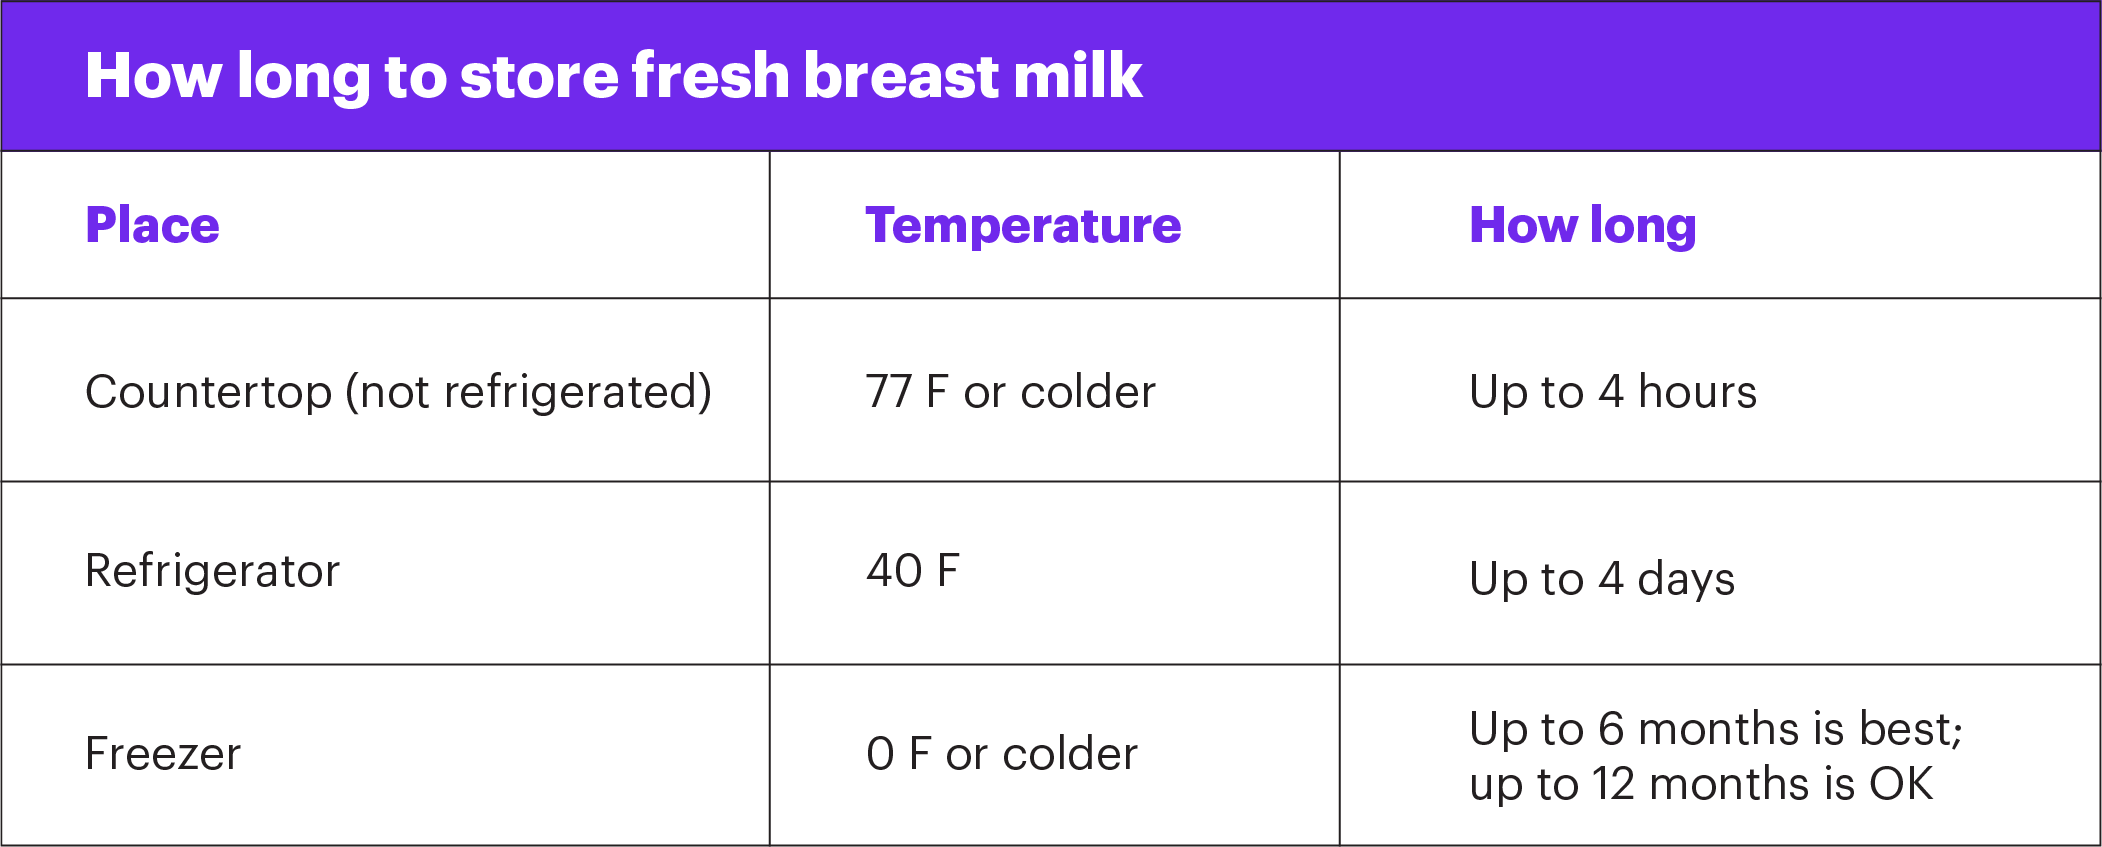 How long to store fresh breast milk chart